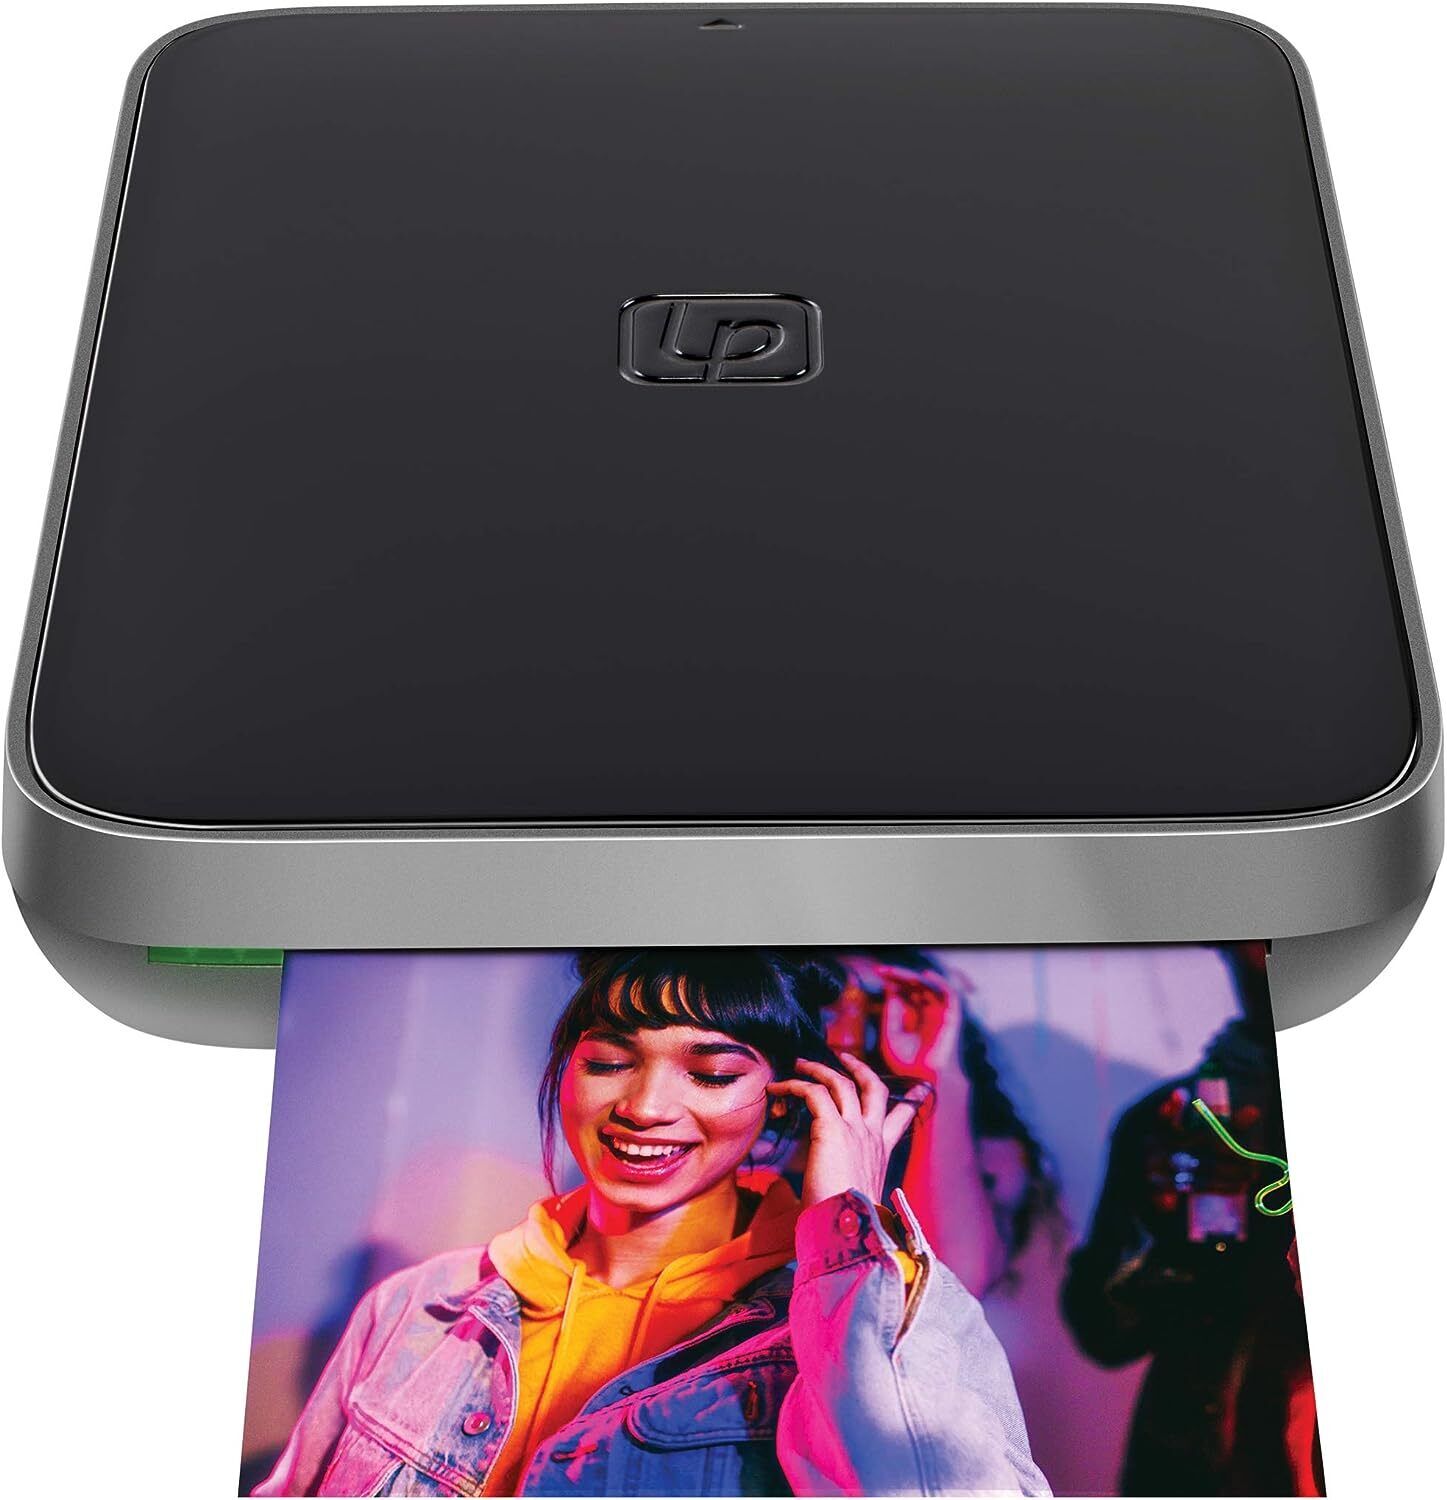 Lifeprint 3x4.5 Portable Photo AND Video Printer for iPhone and Android.